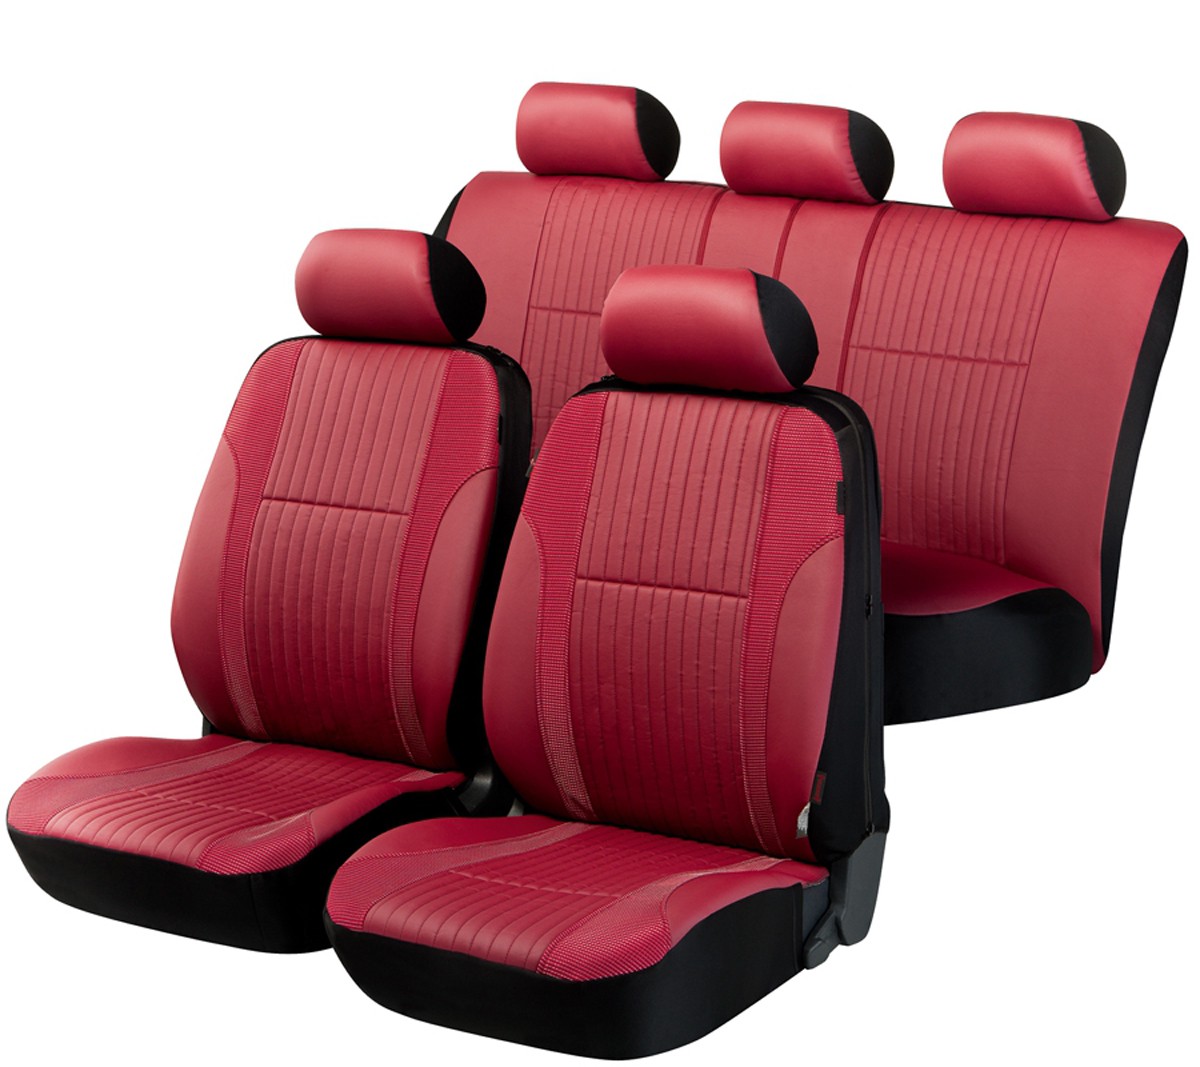 Nissan Micra Car seat covers , Proven Quality carseatcovers24.co.uk